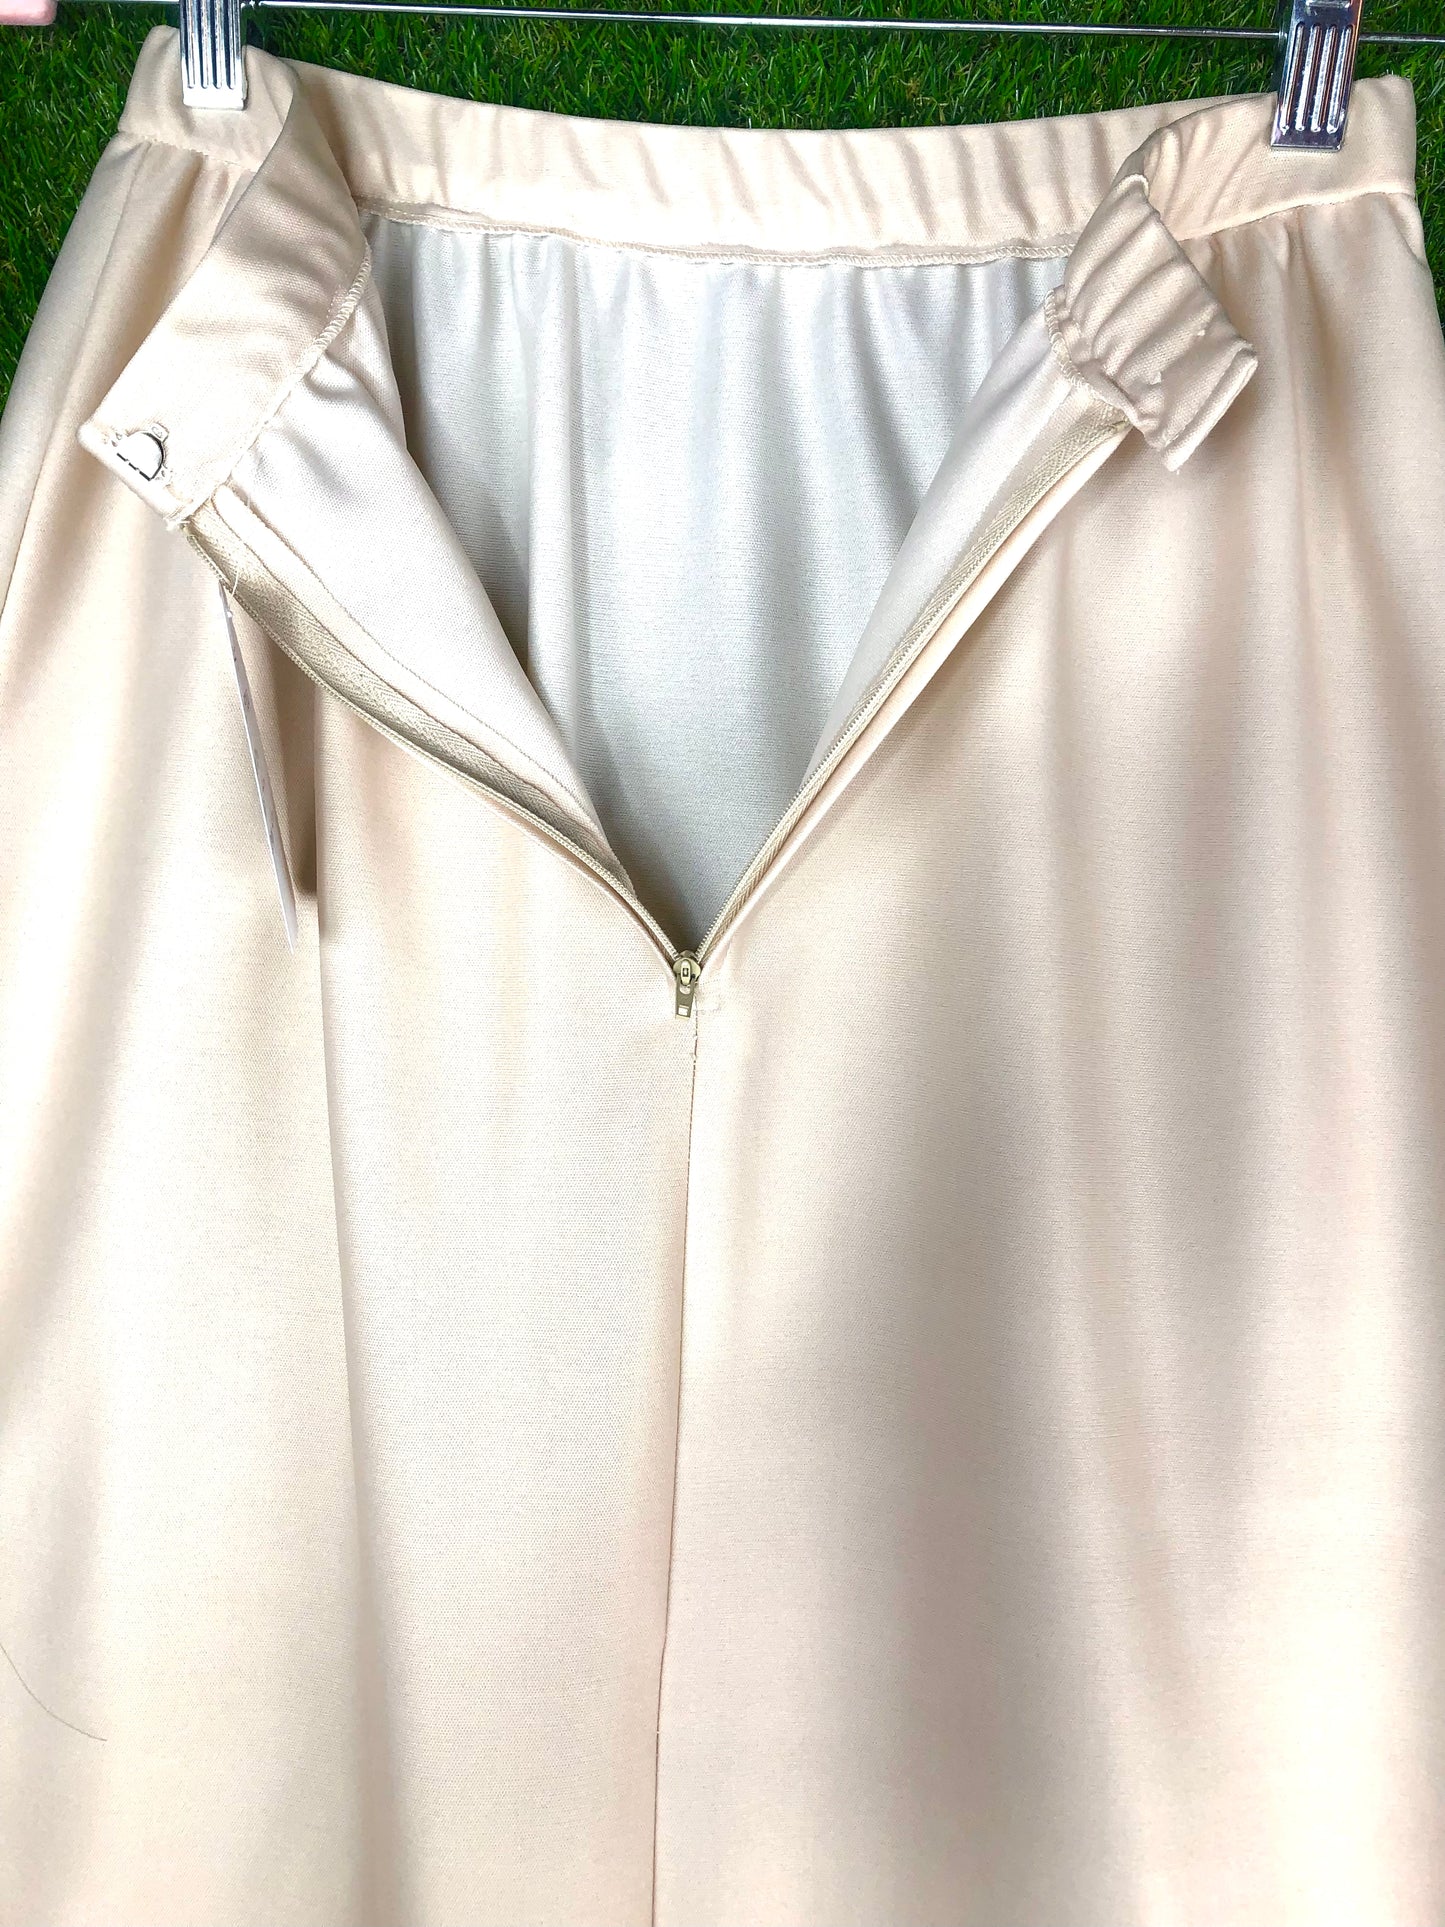 1970's Classic Cream and Black Maxi Skirt With Floral Accents